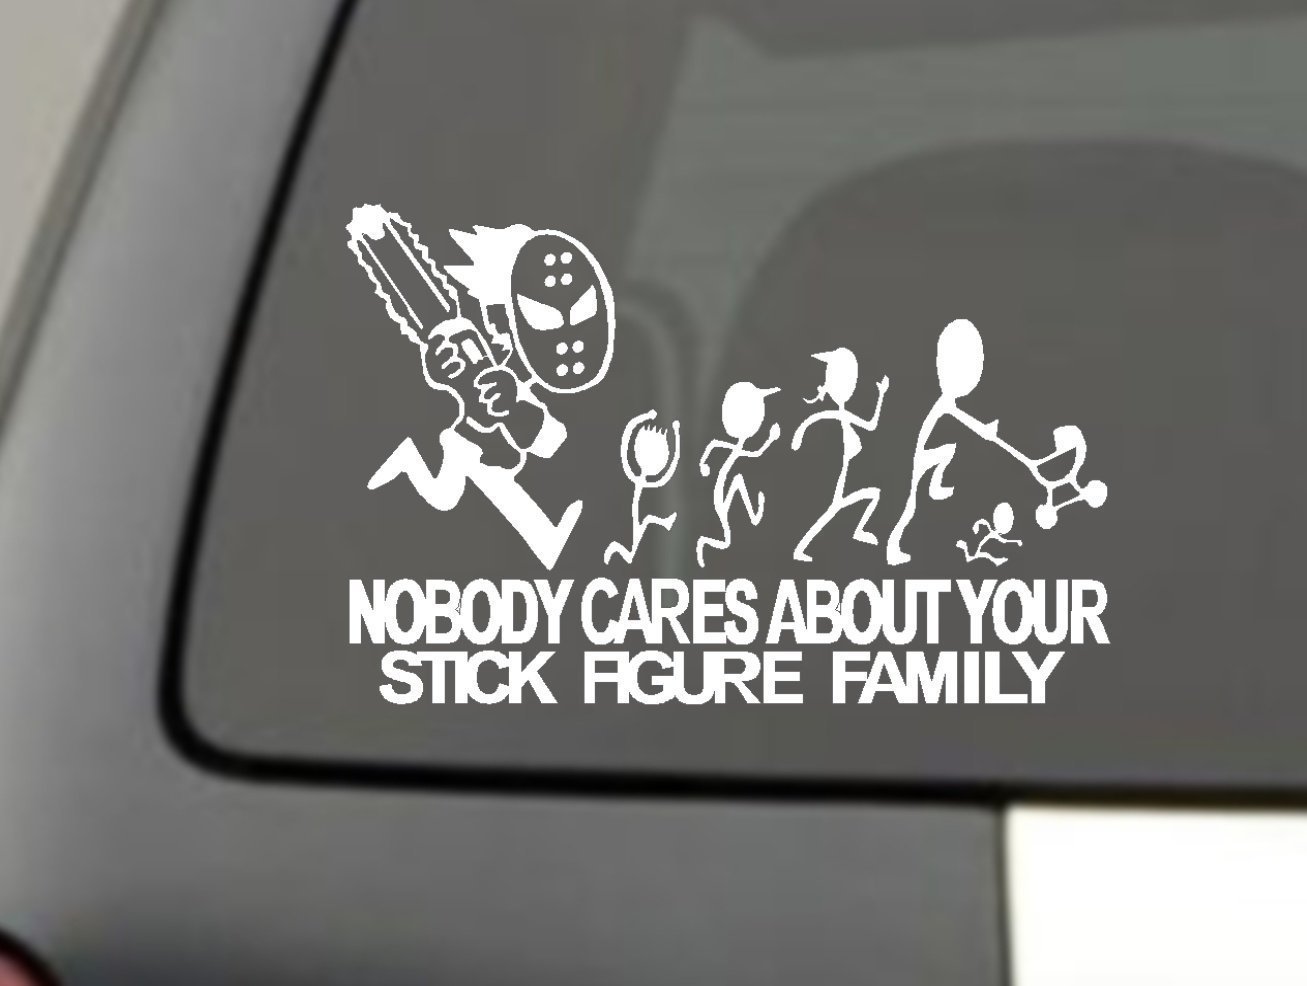 Amazon.com: ChainSaw Decal Nobody cares about YOUR STICK FIGURE ...